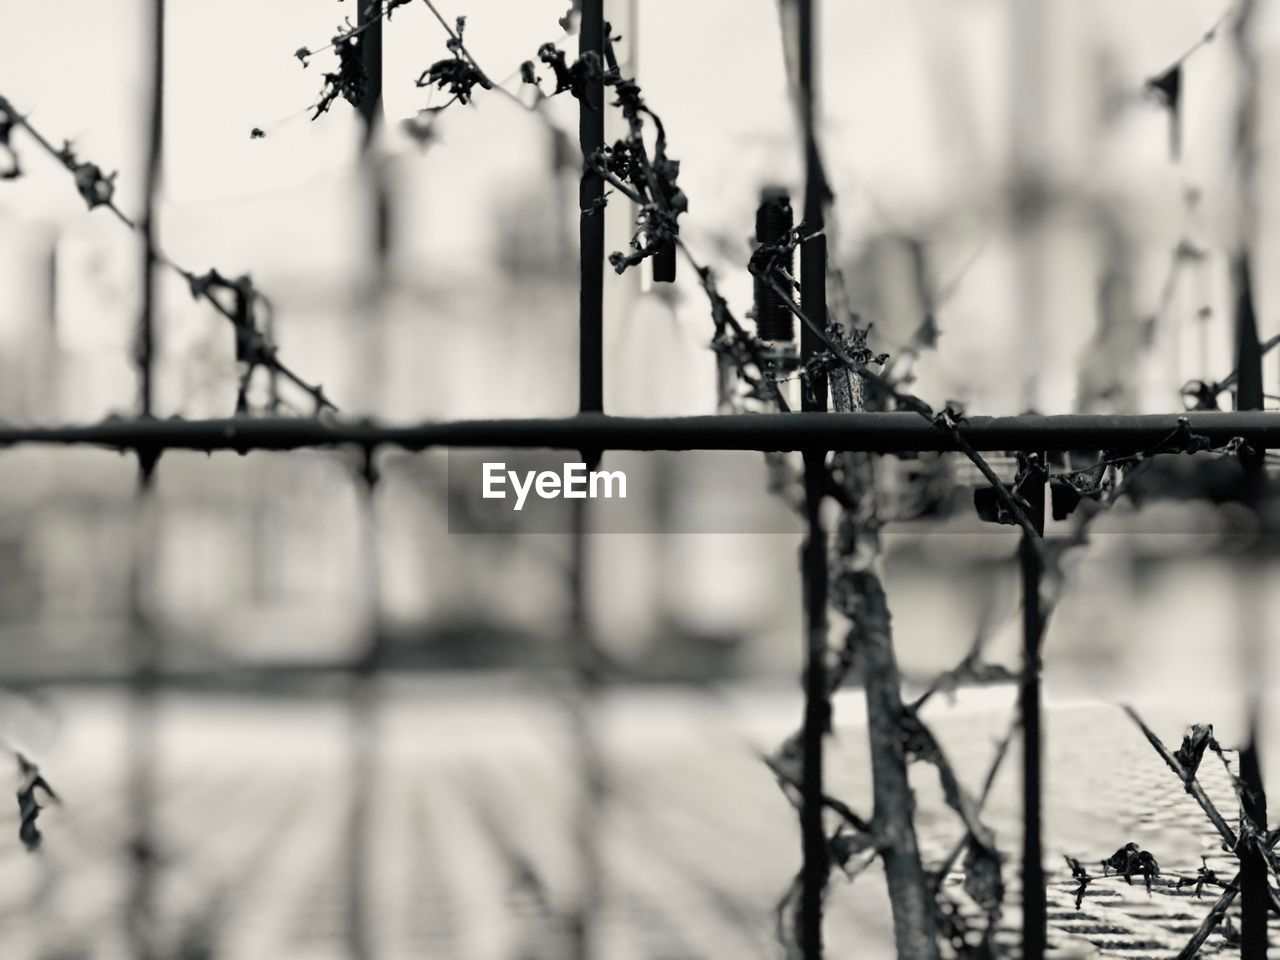 CLOSE-UP OF BARBED WIRE ON FENCE DURING WINTER